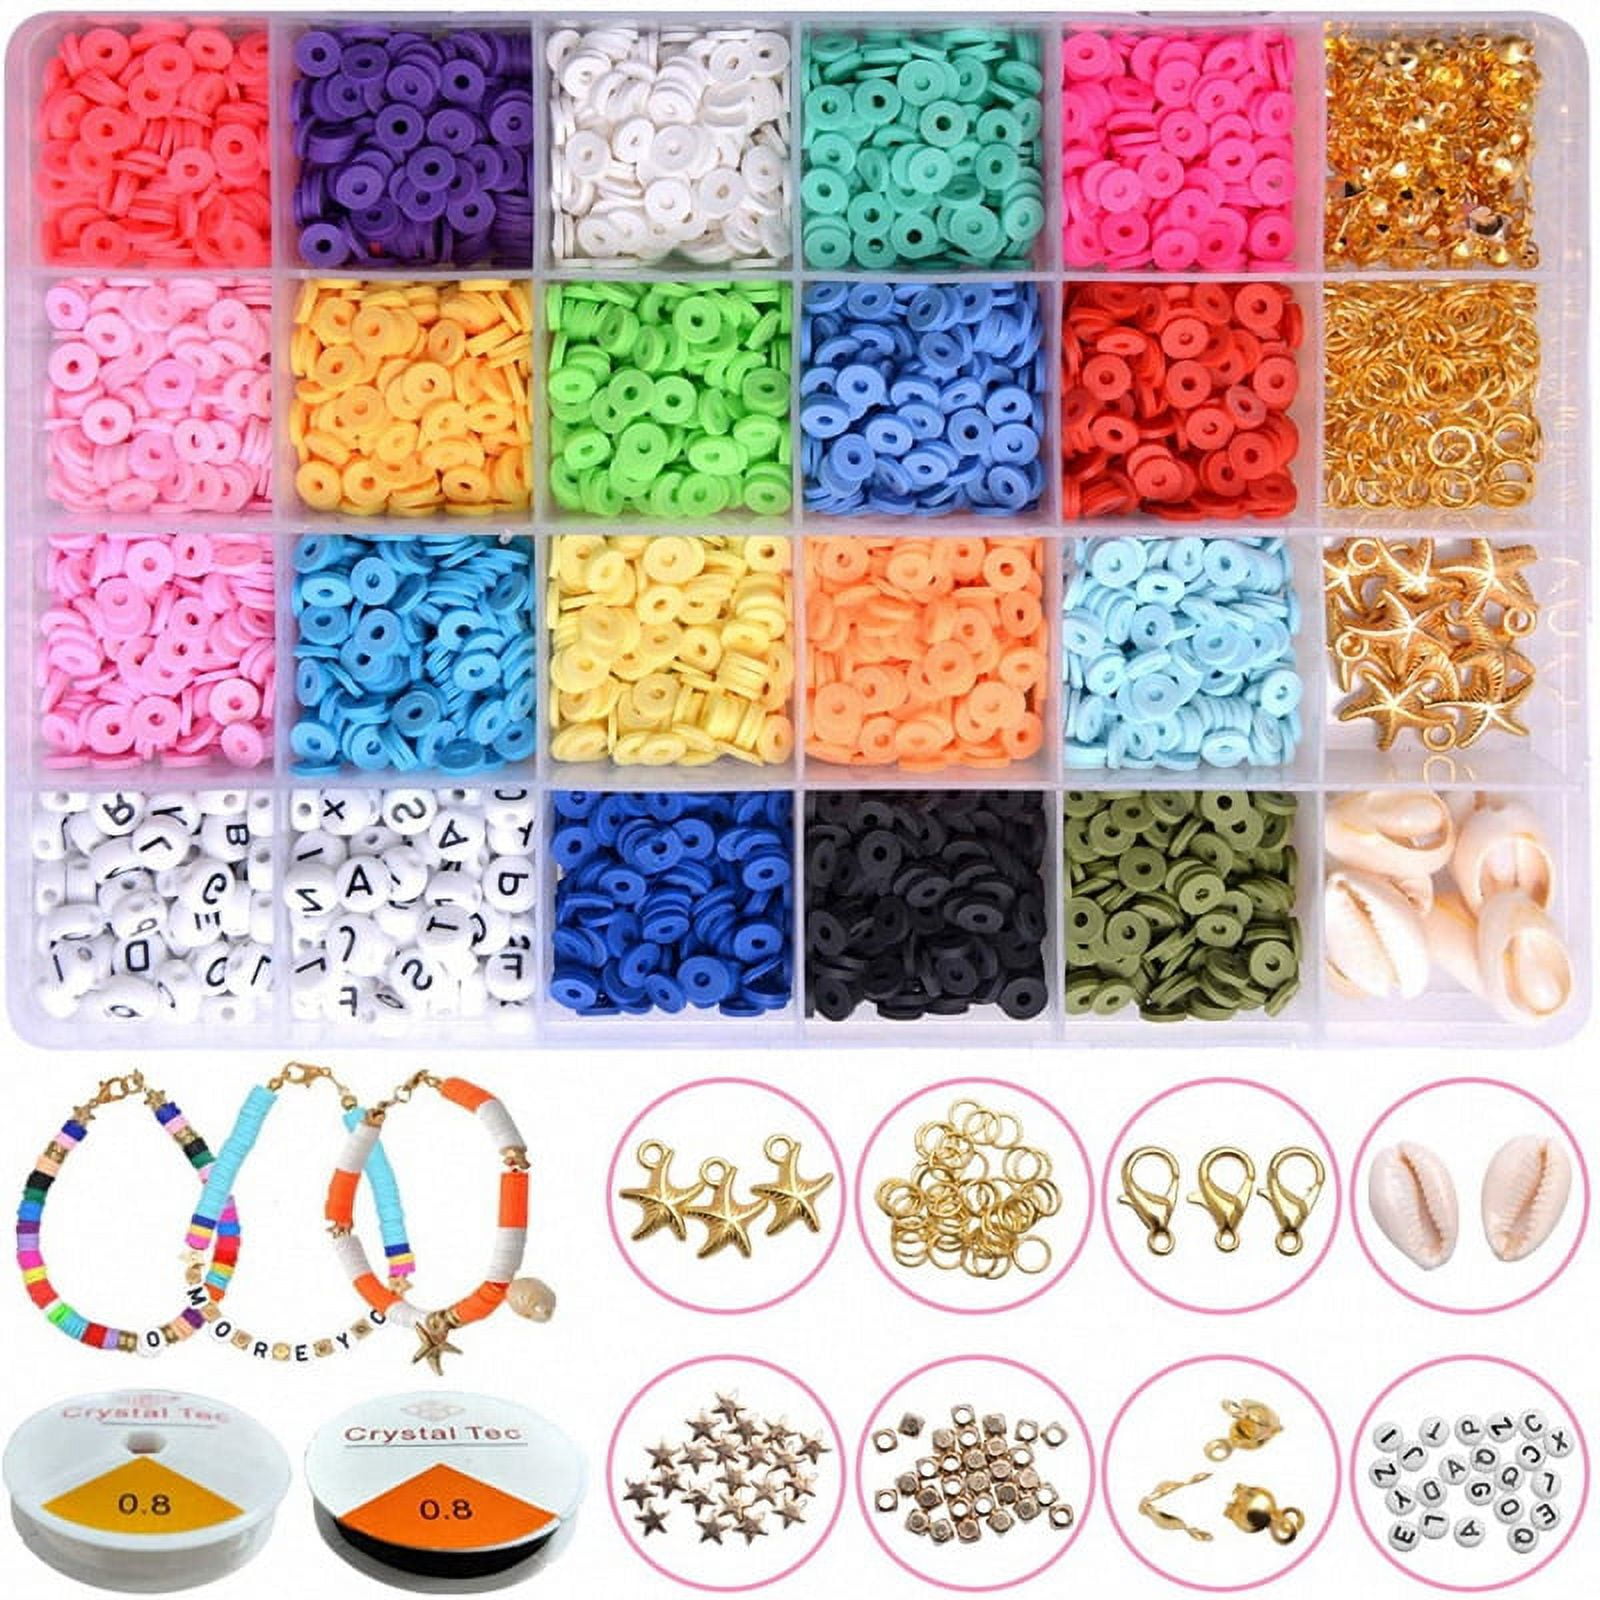 Suziko Bracelet Making Kit, 7400 Pcs Clay Beads Flat Round Clay Beads for  Jewelry Making Crafts Gift for Girls Ages 3-12(2 Box)